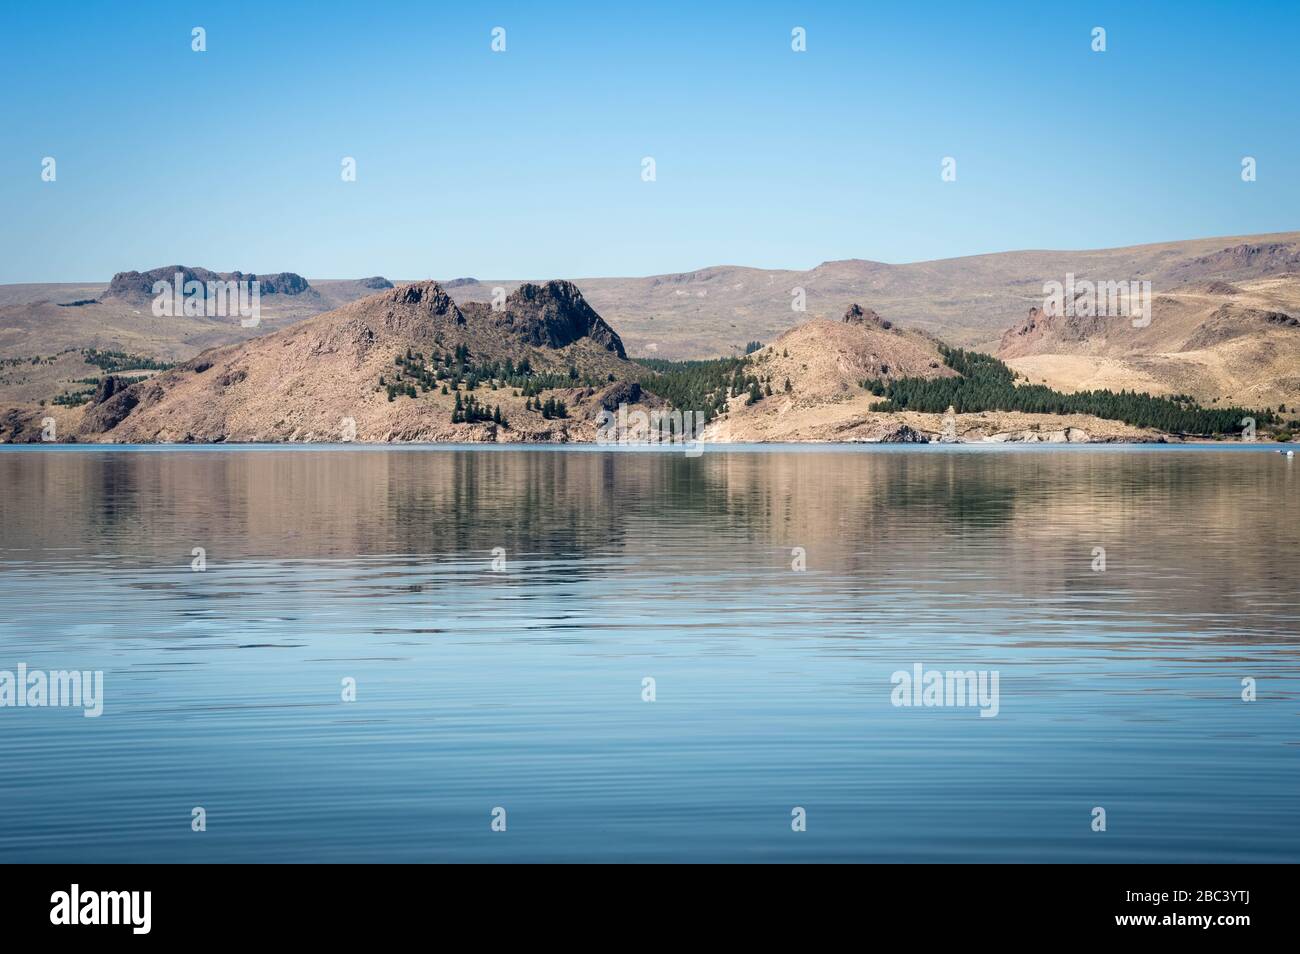 Lake, pines and mountains in the province of NeuquÃ©n, Argentina. Stock Photo